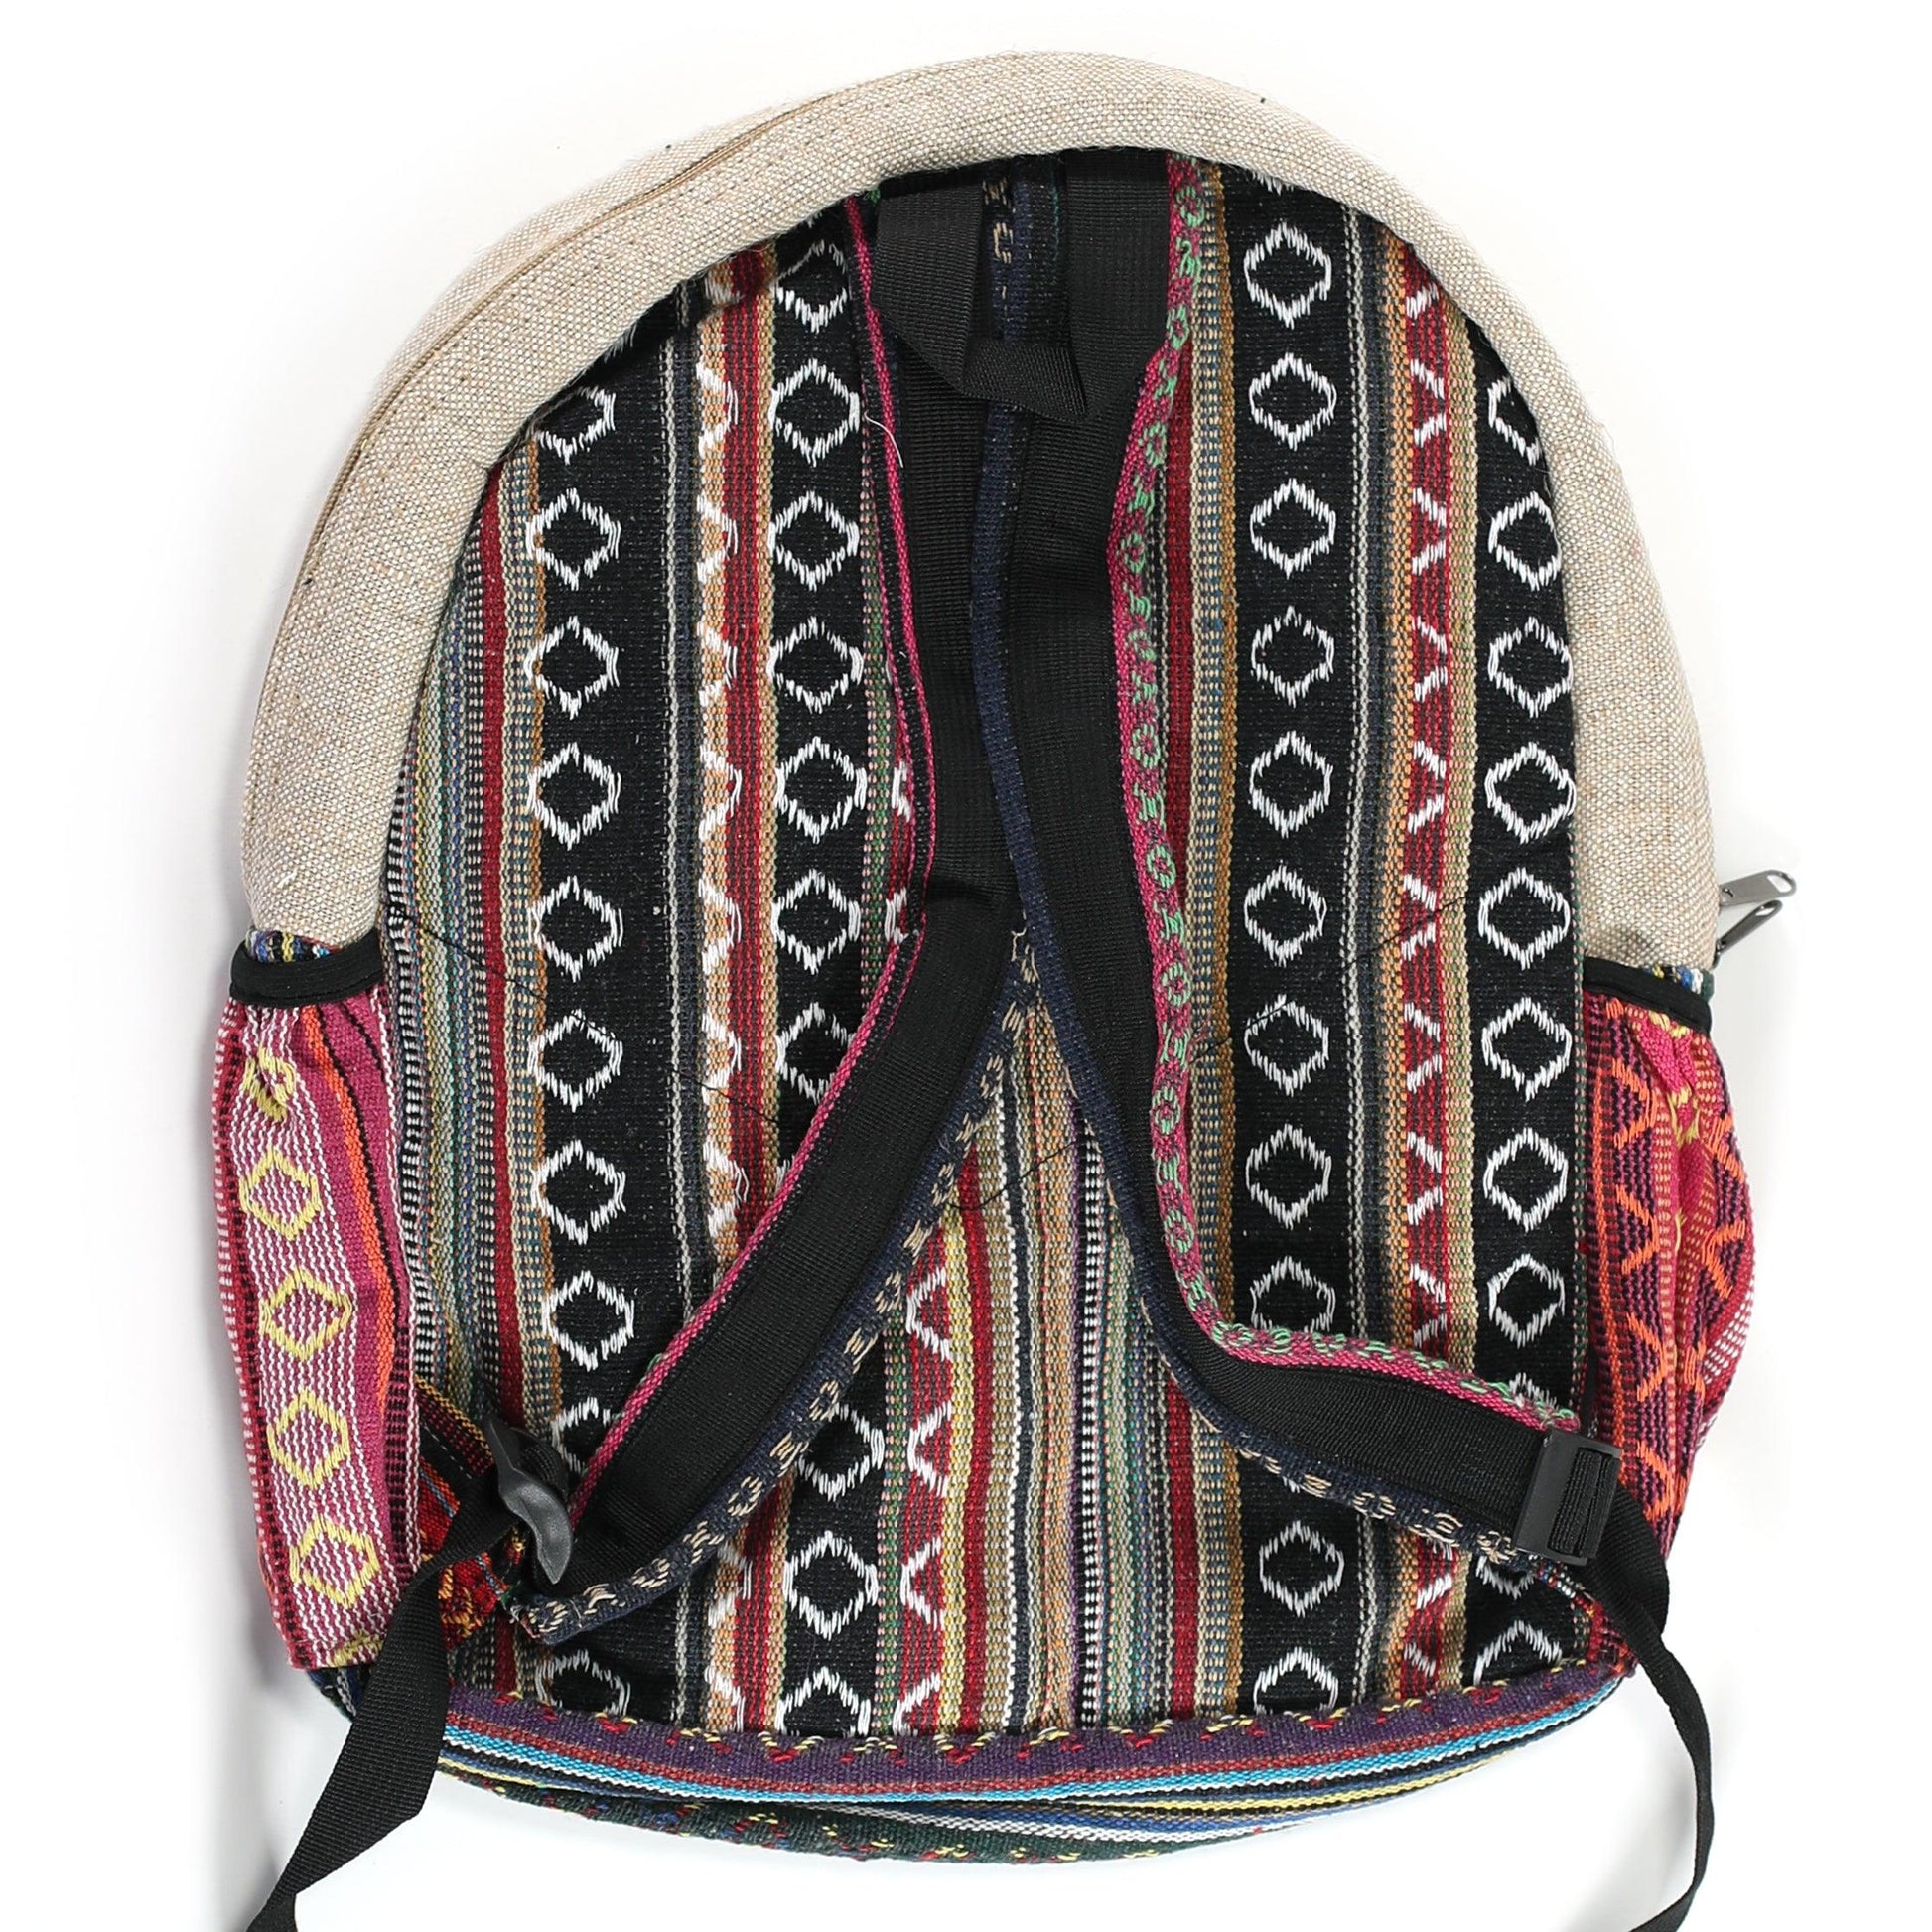 Hemp Backpack (6 photos) - Photography and Web Design - Los Angeles, US based Shopify Experts Revo Designs